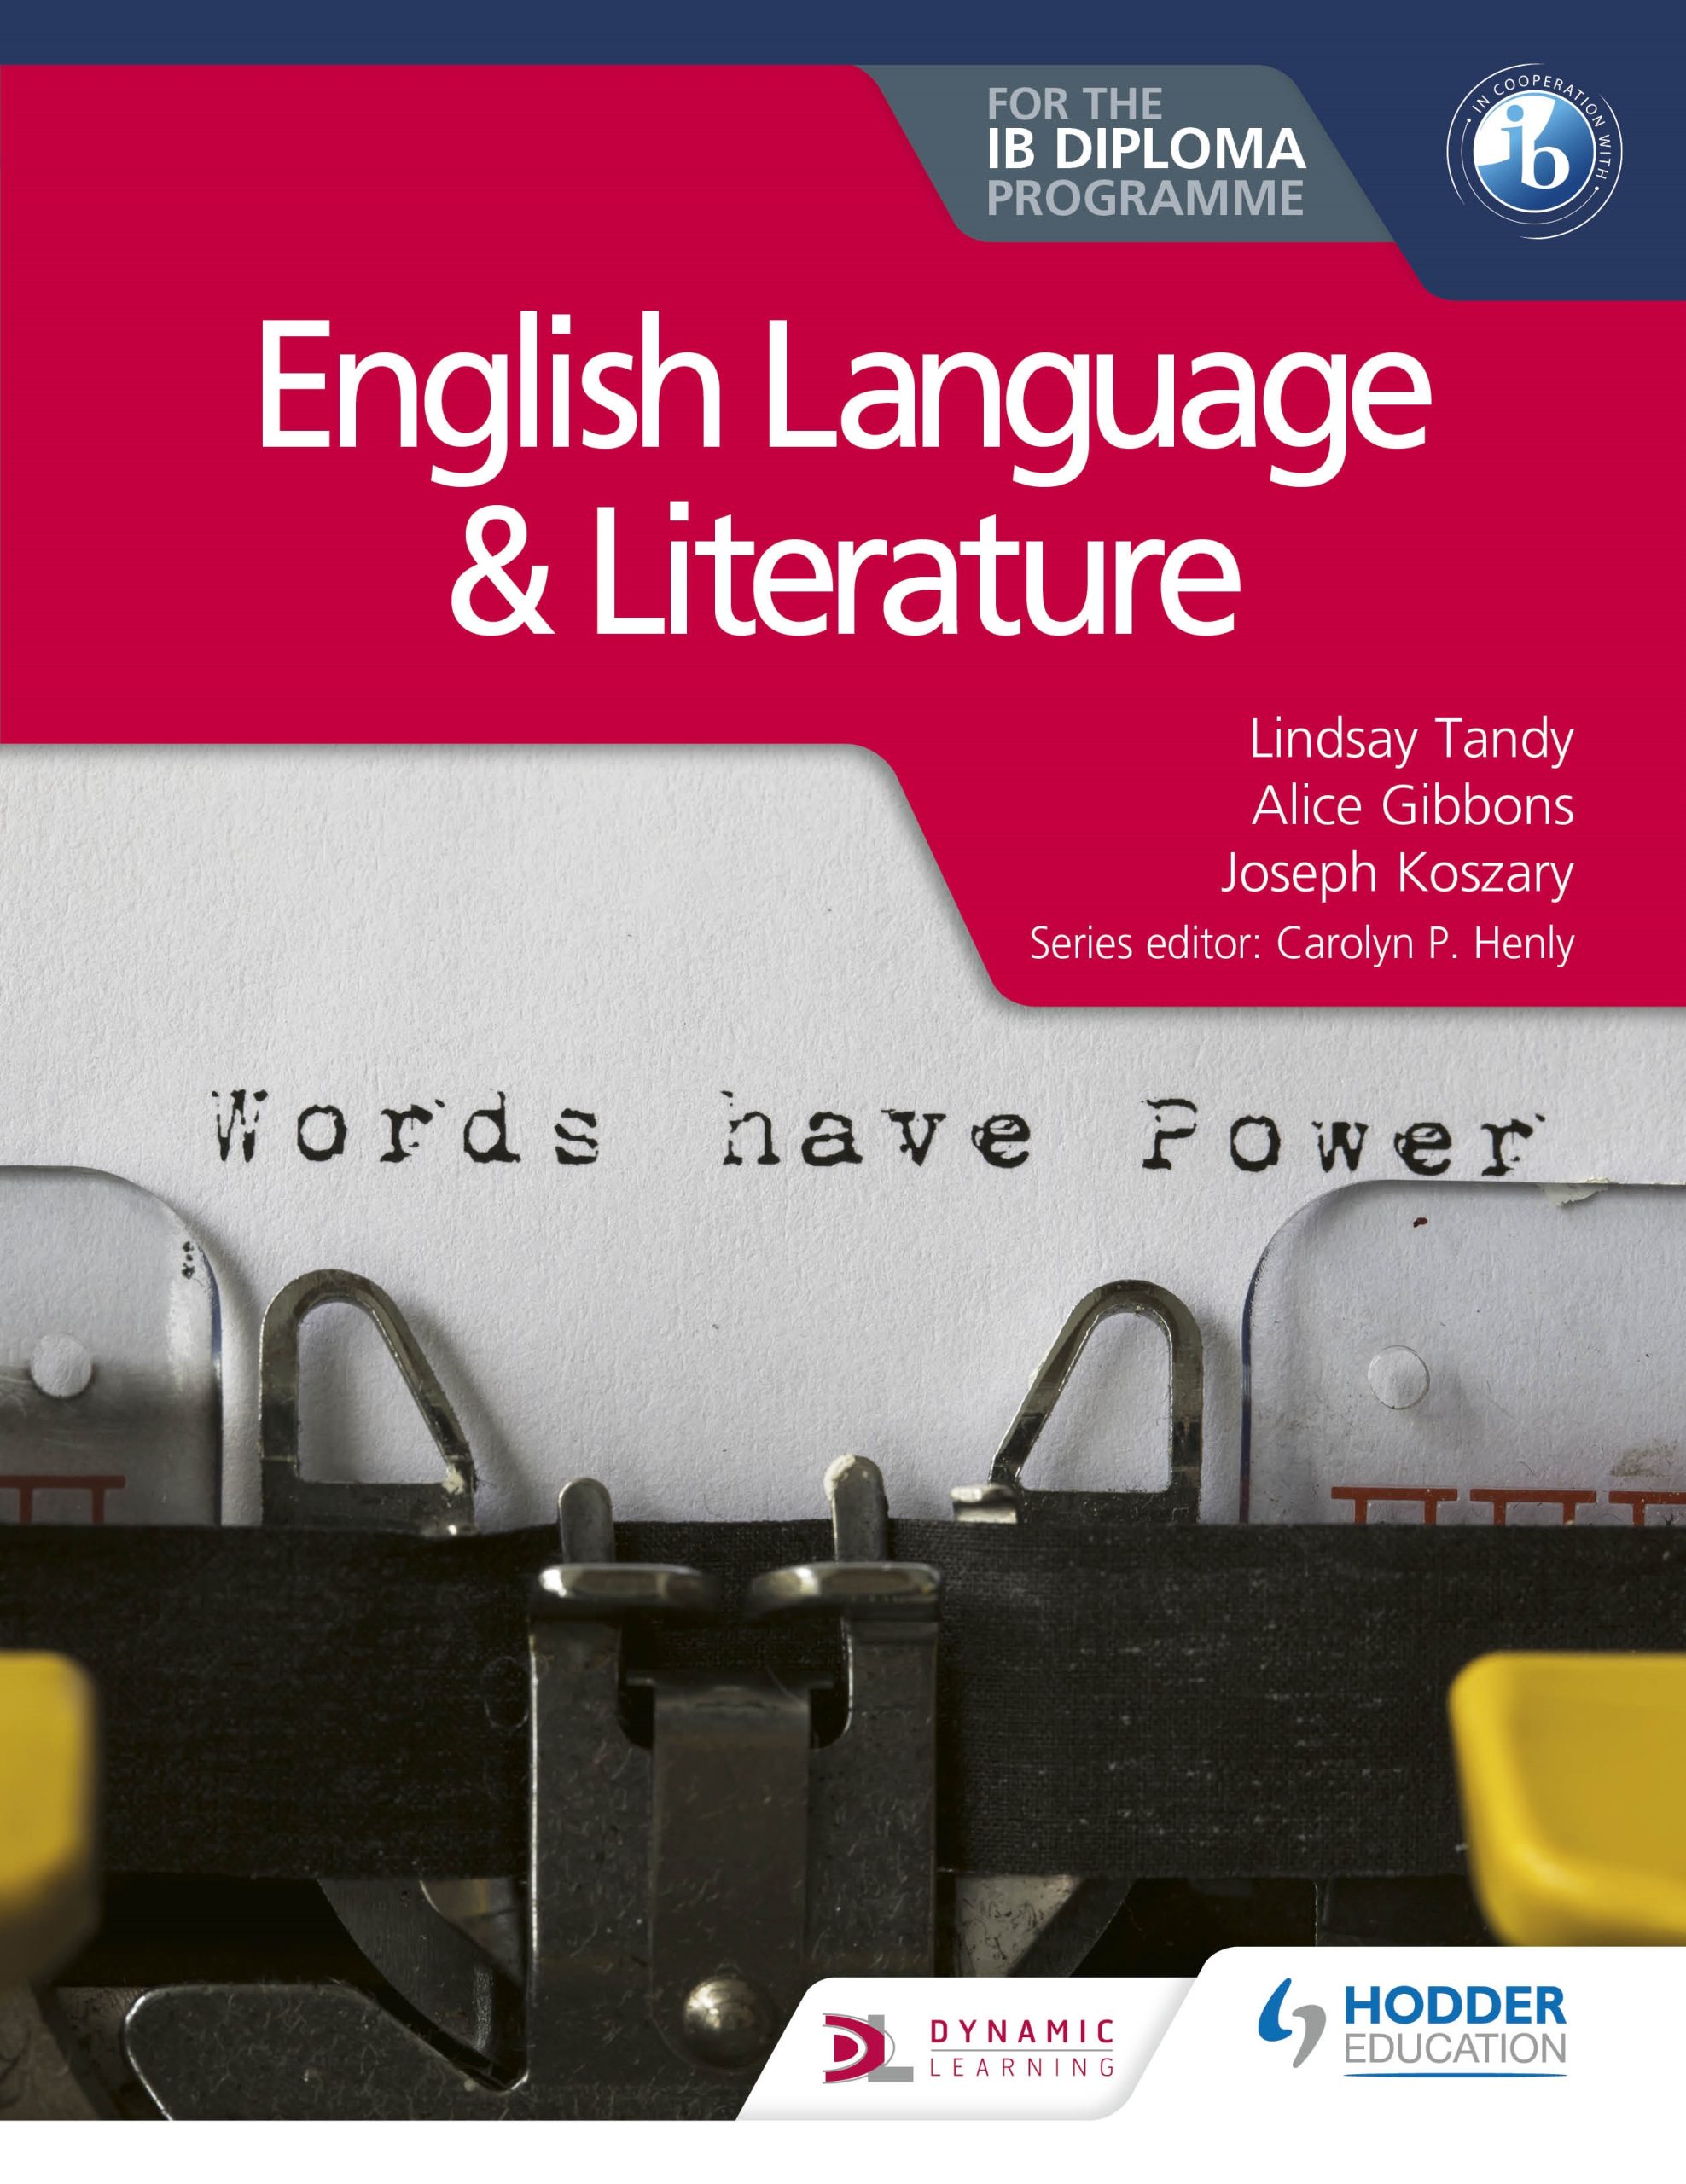 Featured image for “English Language and Literature for the IB Diploma”